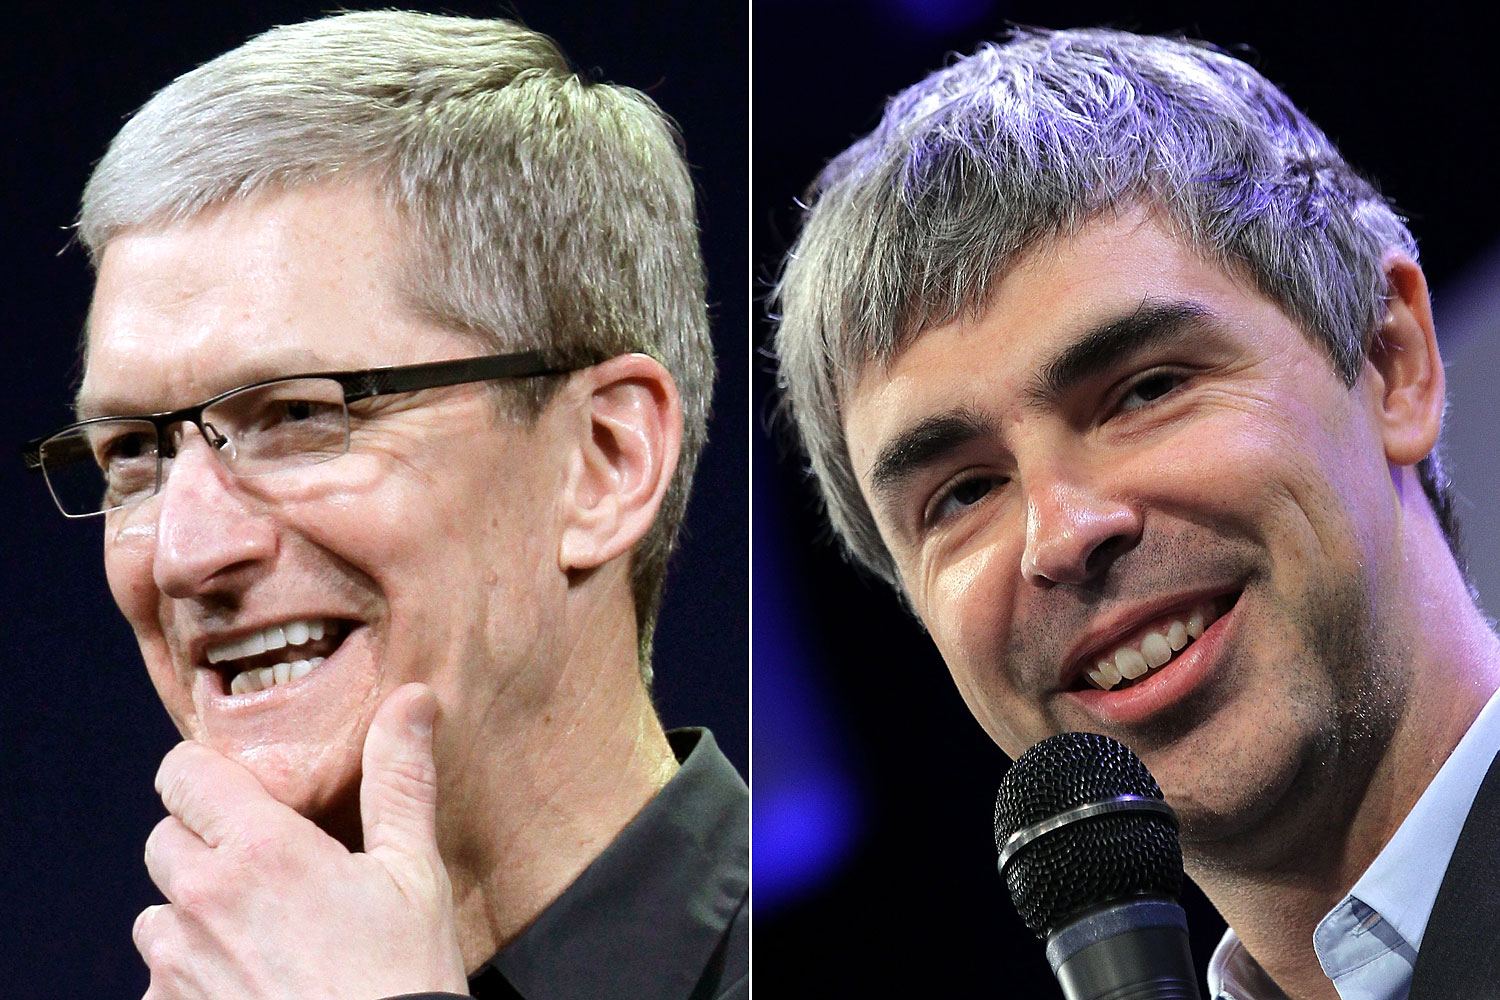 Apple CEO Tim Cook and Google CEO Larry Page. (From left: Paul Sakuma—AP; Justin Sullivan—Getty Images)